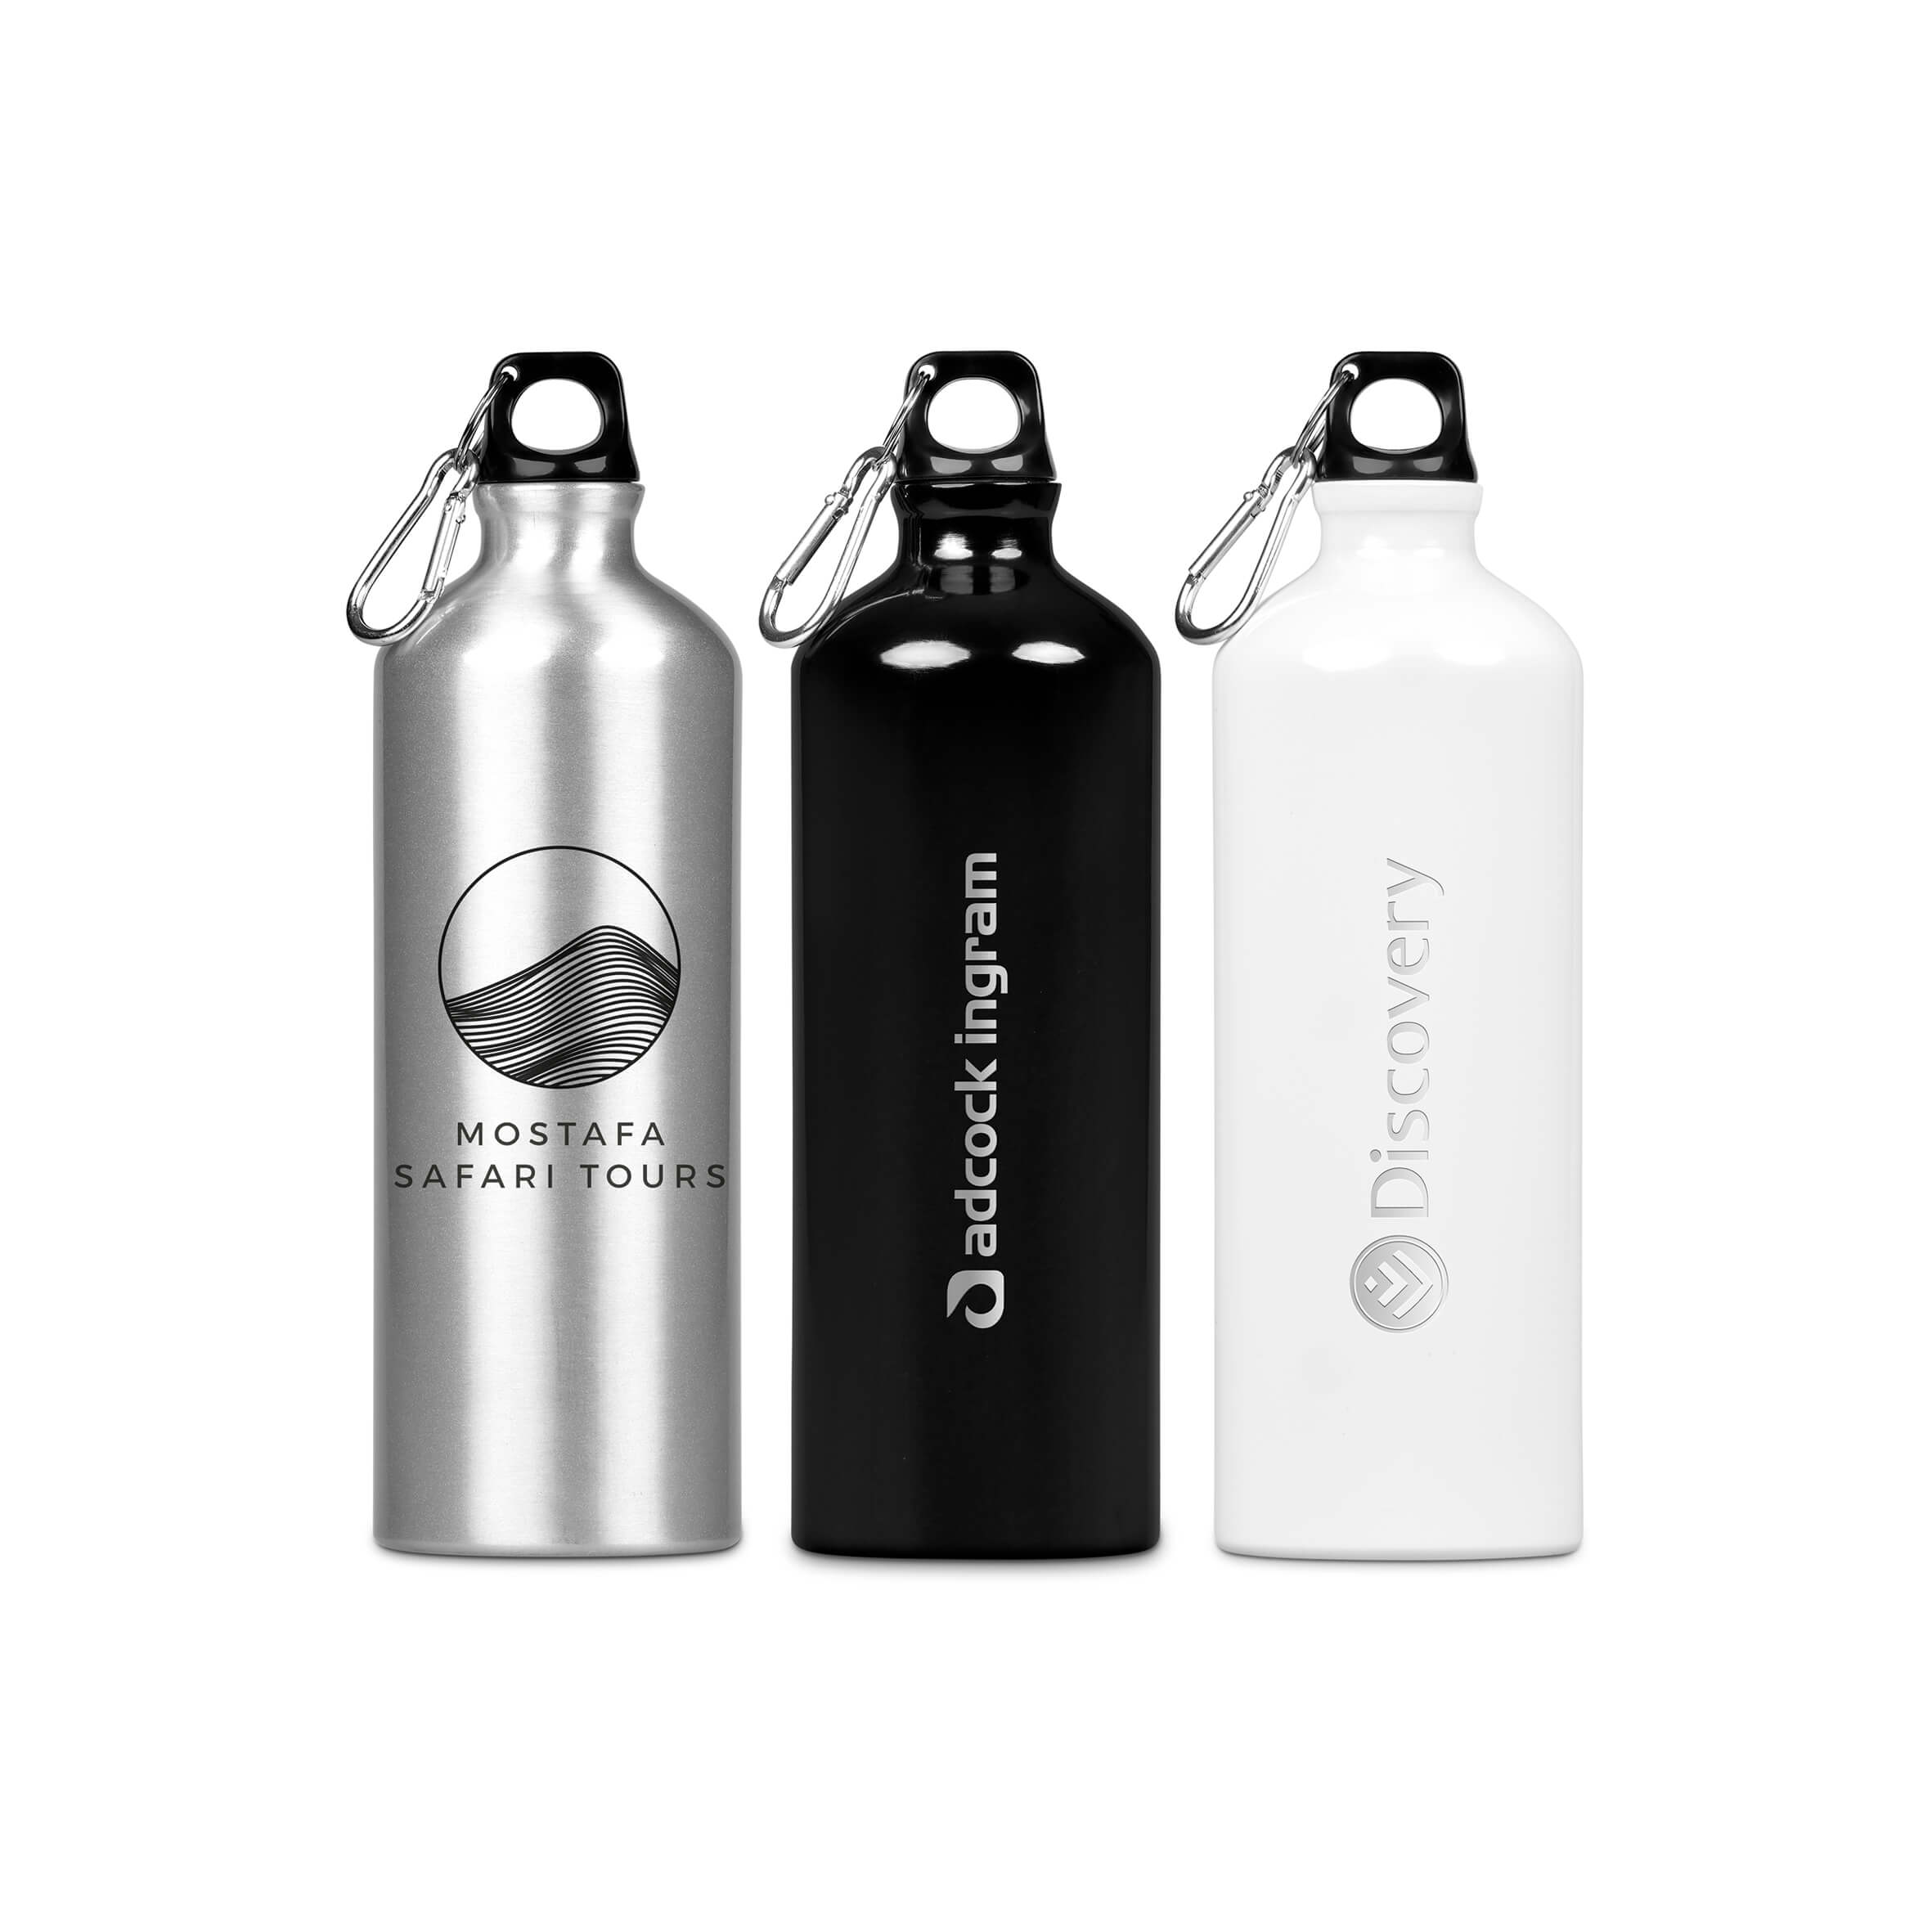 Our Top Promotional Gifts 17